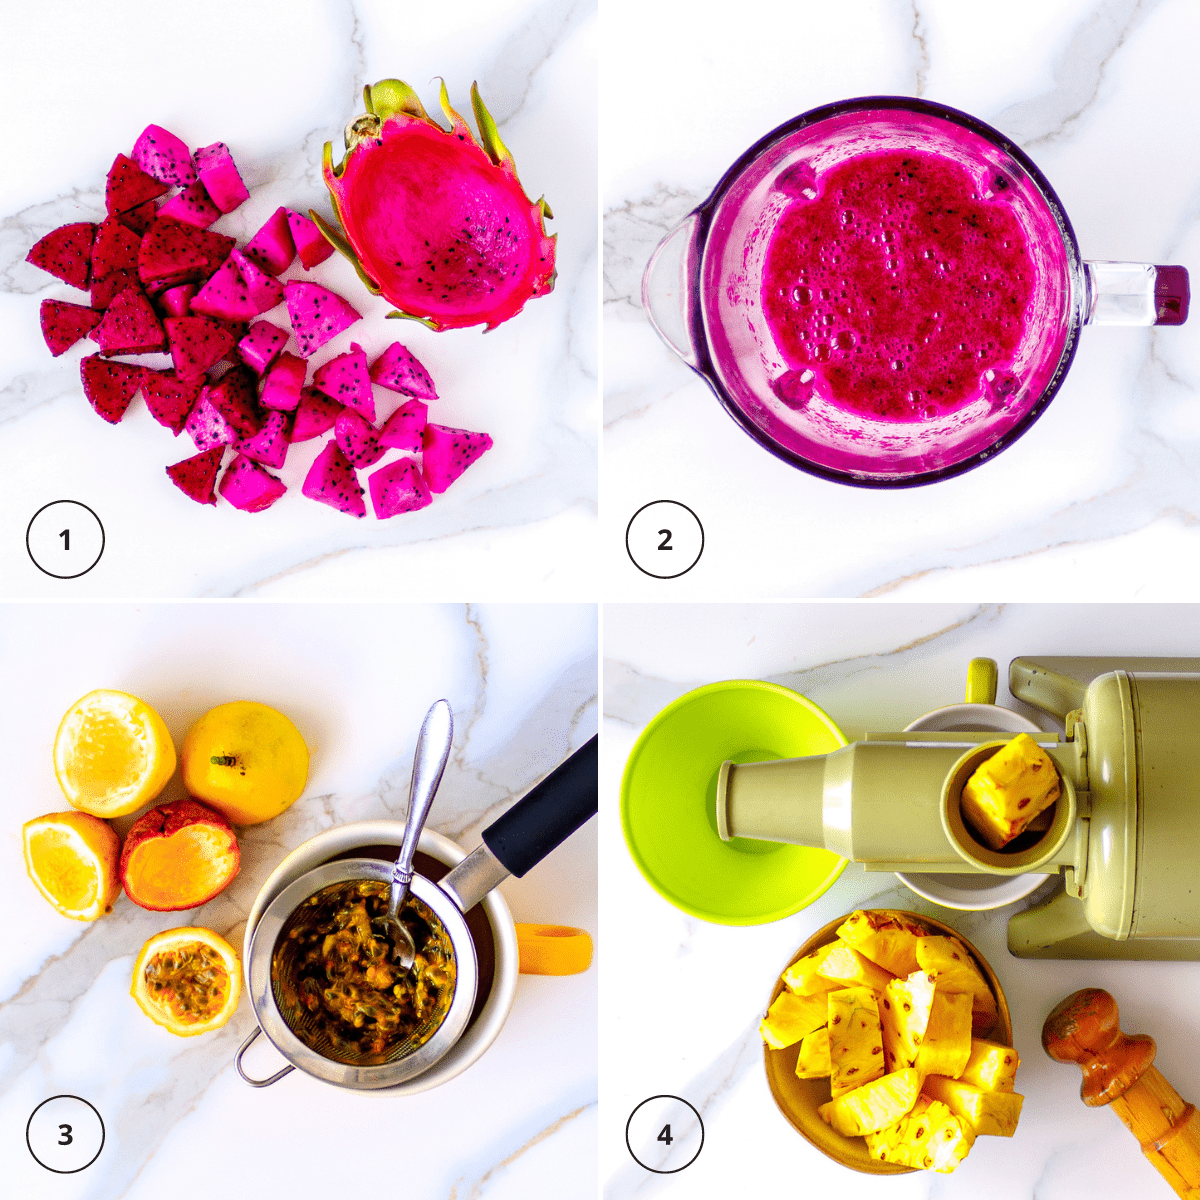 Cut , blend, strain and juice fruits.ion and pineapple juices.